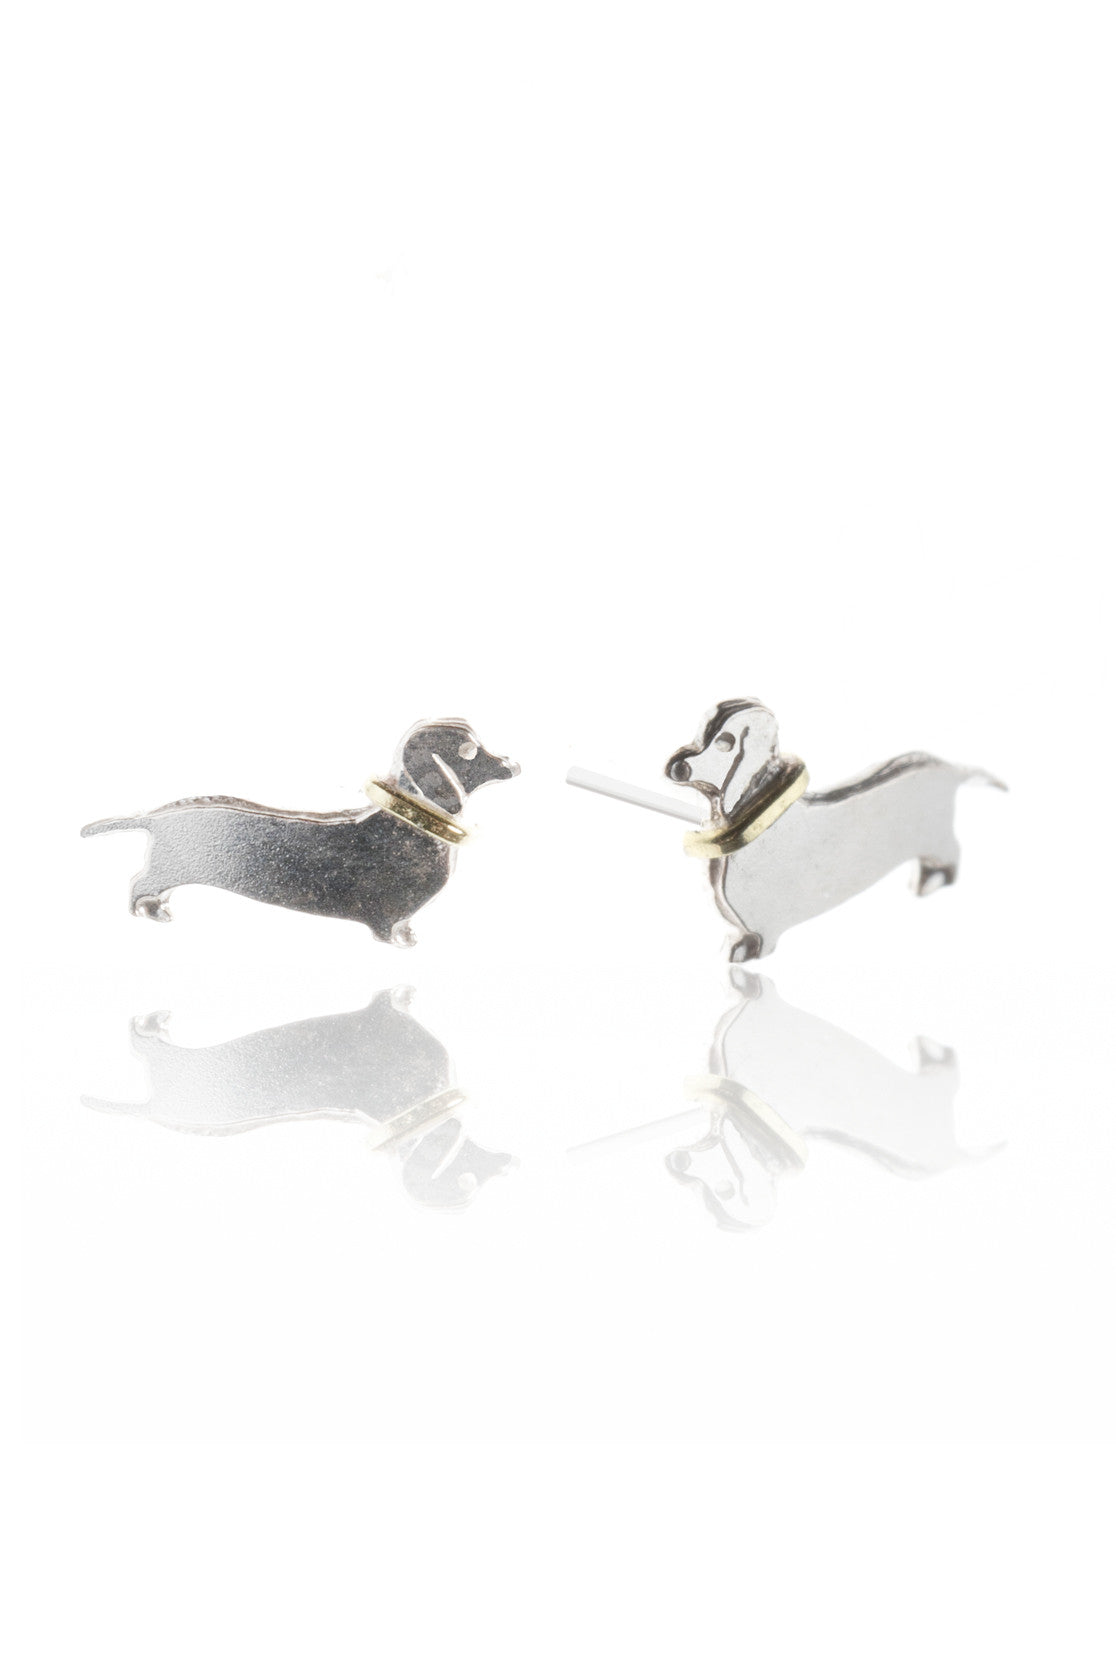 Dog stud earrings made from solid sterling silver with gold collar detailing